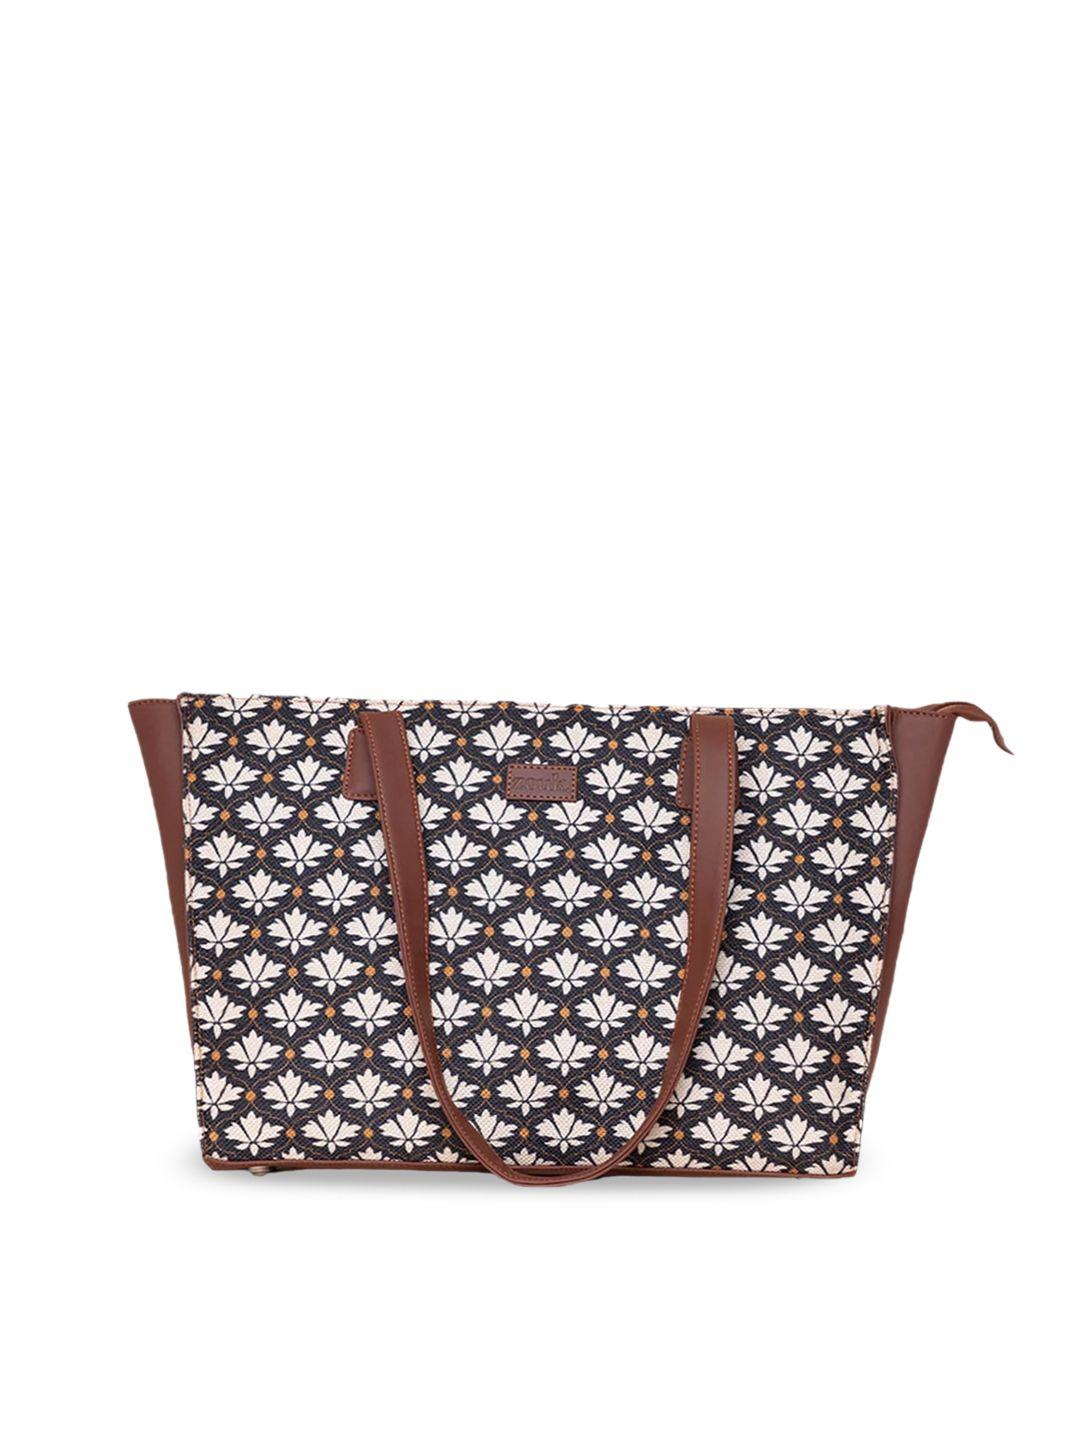 zouk ethnic motifs printed structured tote bag